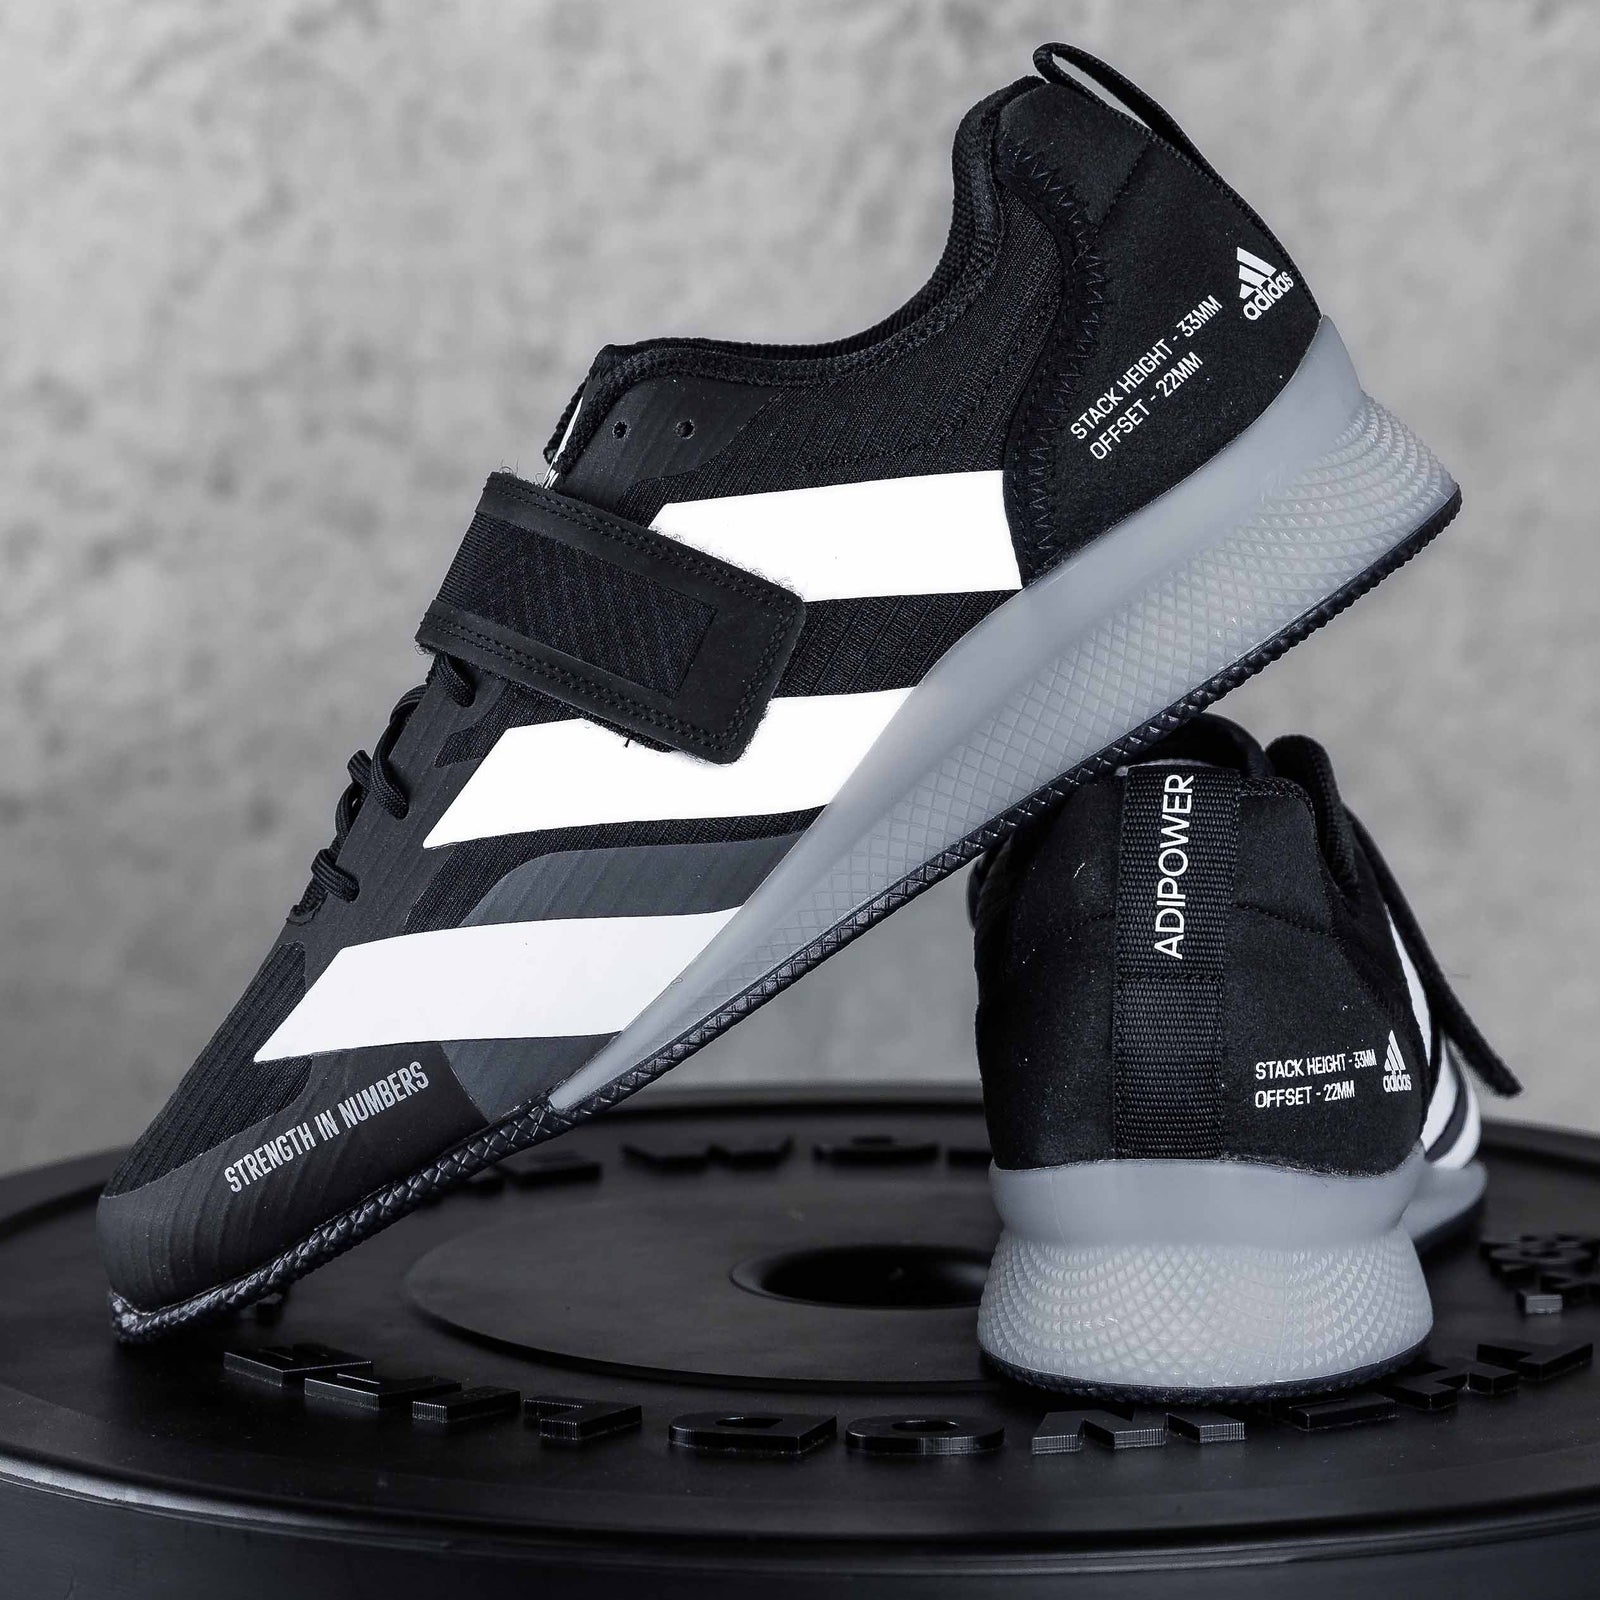 ADIDAS - ADIPOWER WEIGHTLIFTING 3 SHOES CORE BLACK/CLOUD WHITE/GREY thewodlife.com